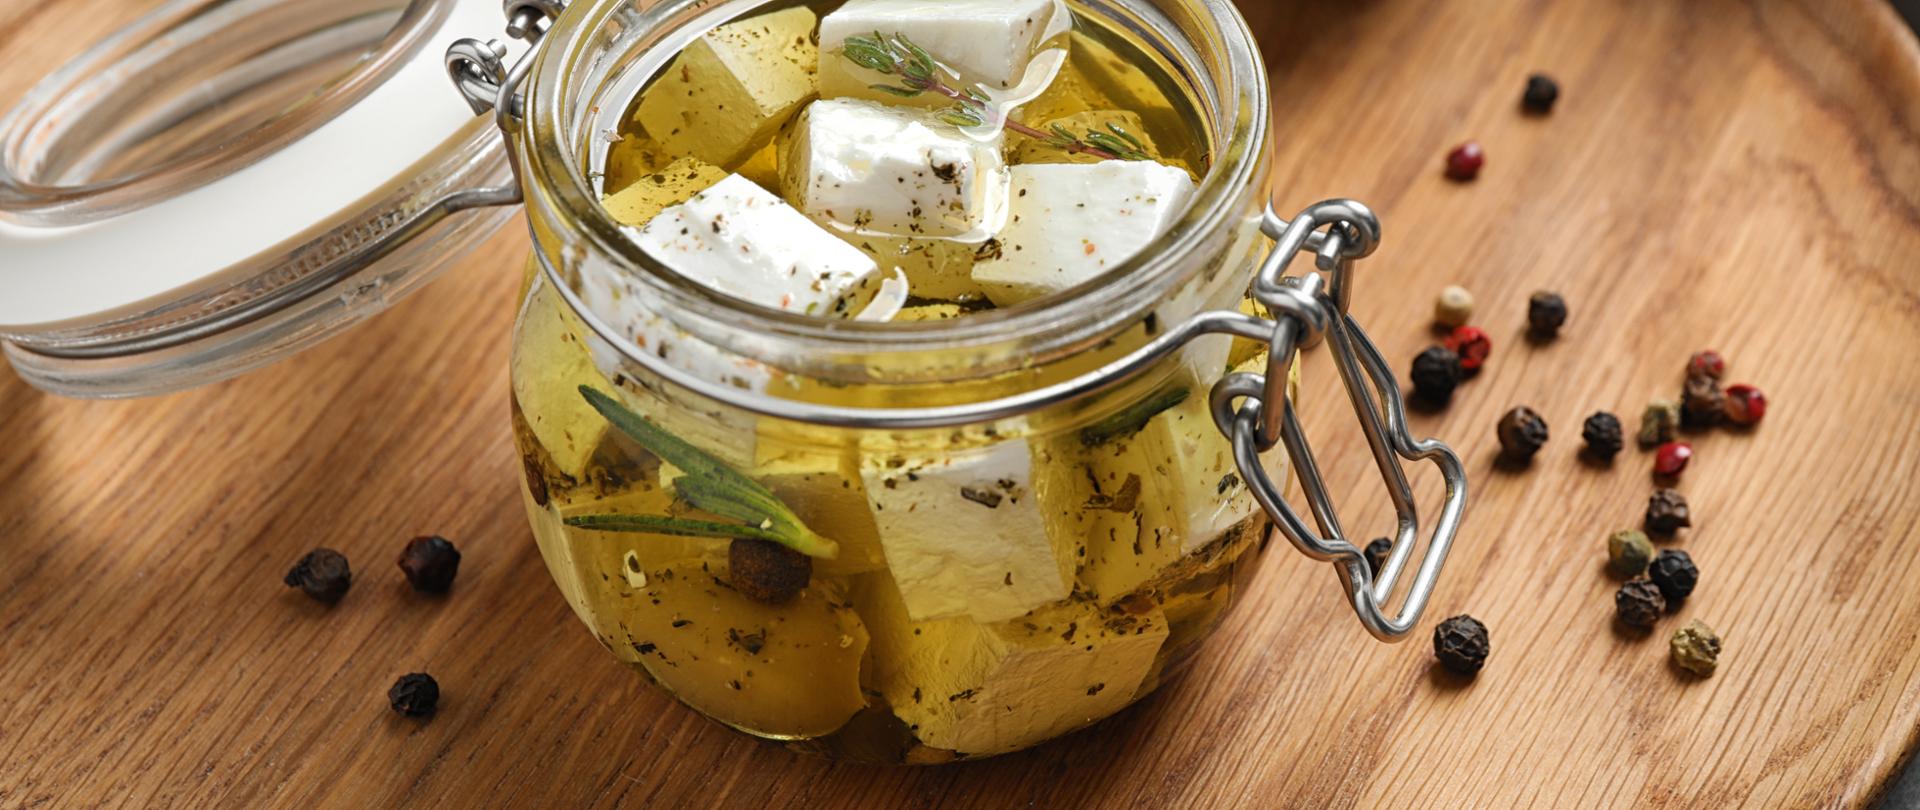 Jar with feta cheese marinated in oil on table. Pickled food